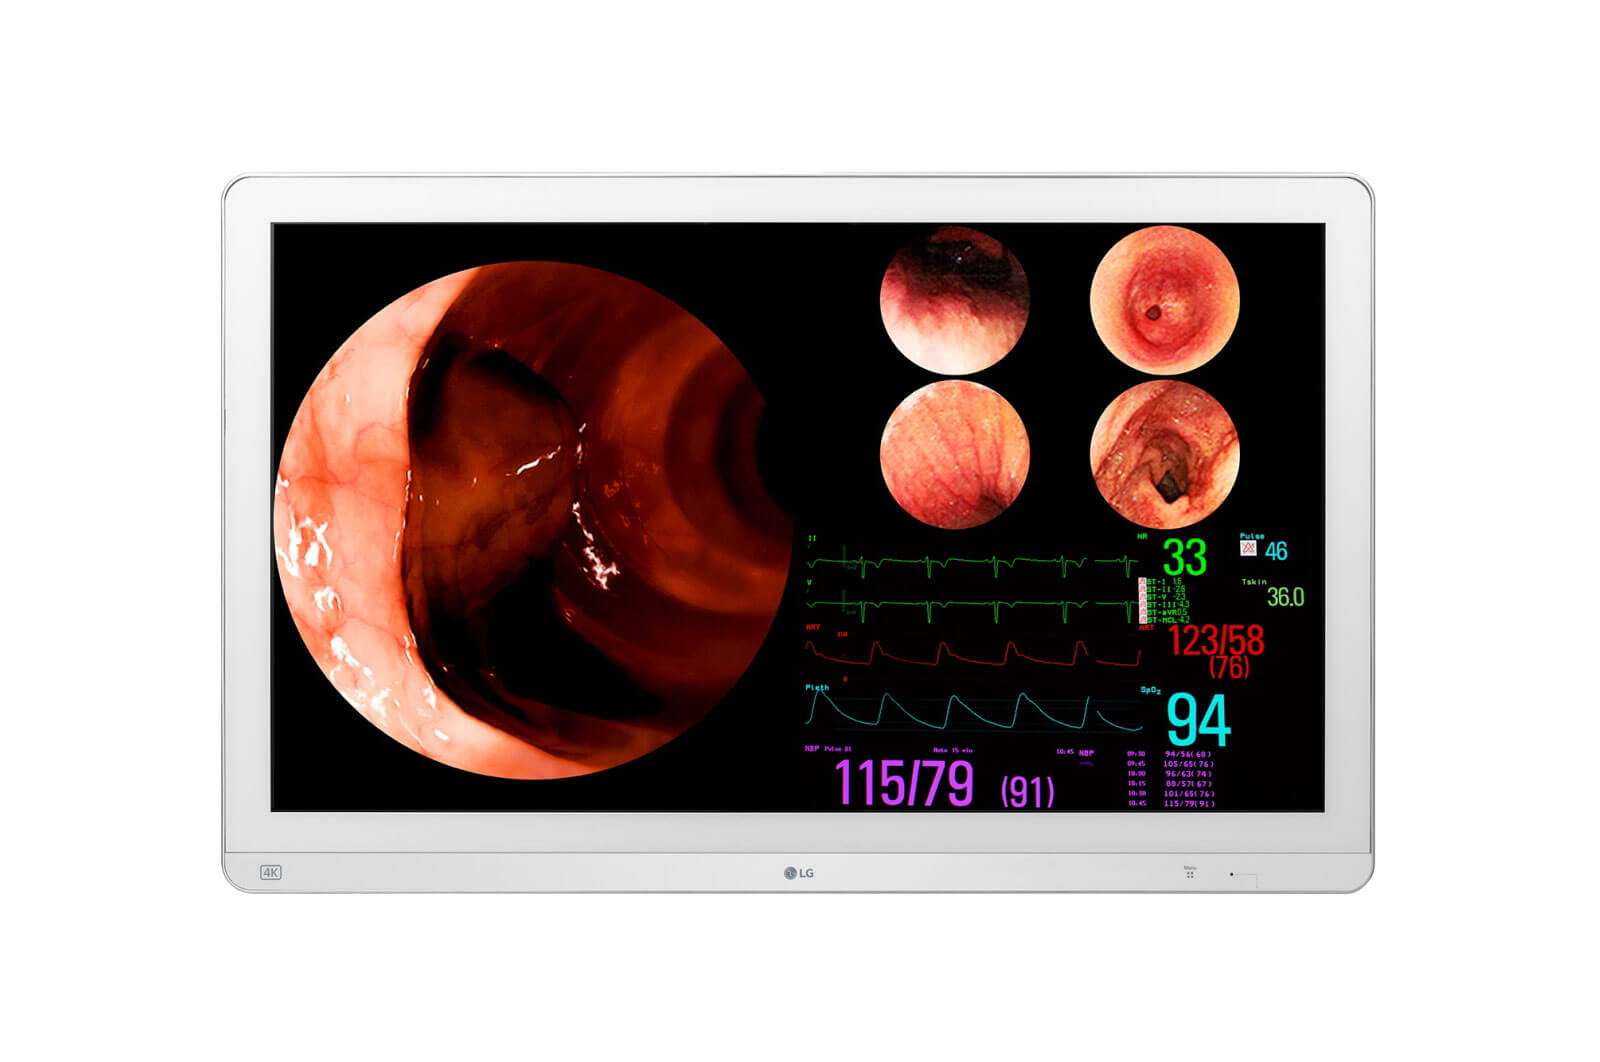 Medical monitor LG 32HL710S-W 31.5" 4K LED Surgical Display supports HDR10